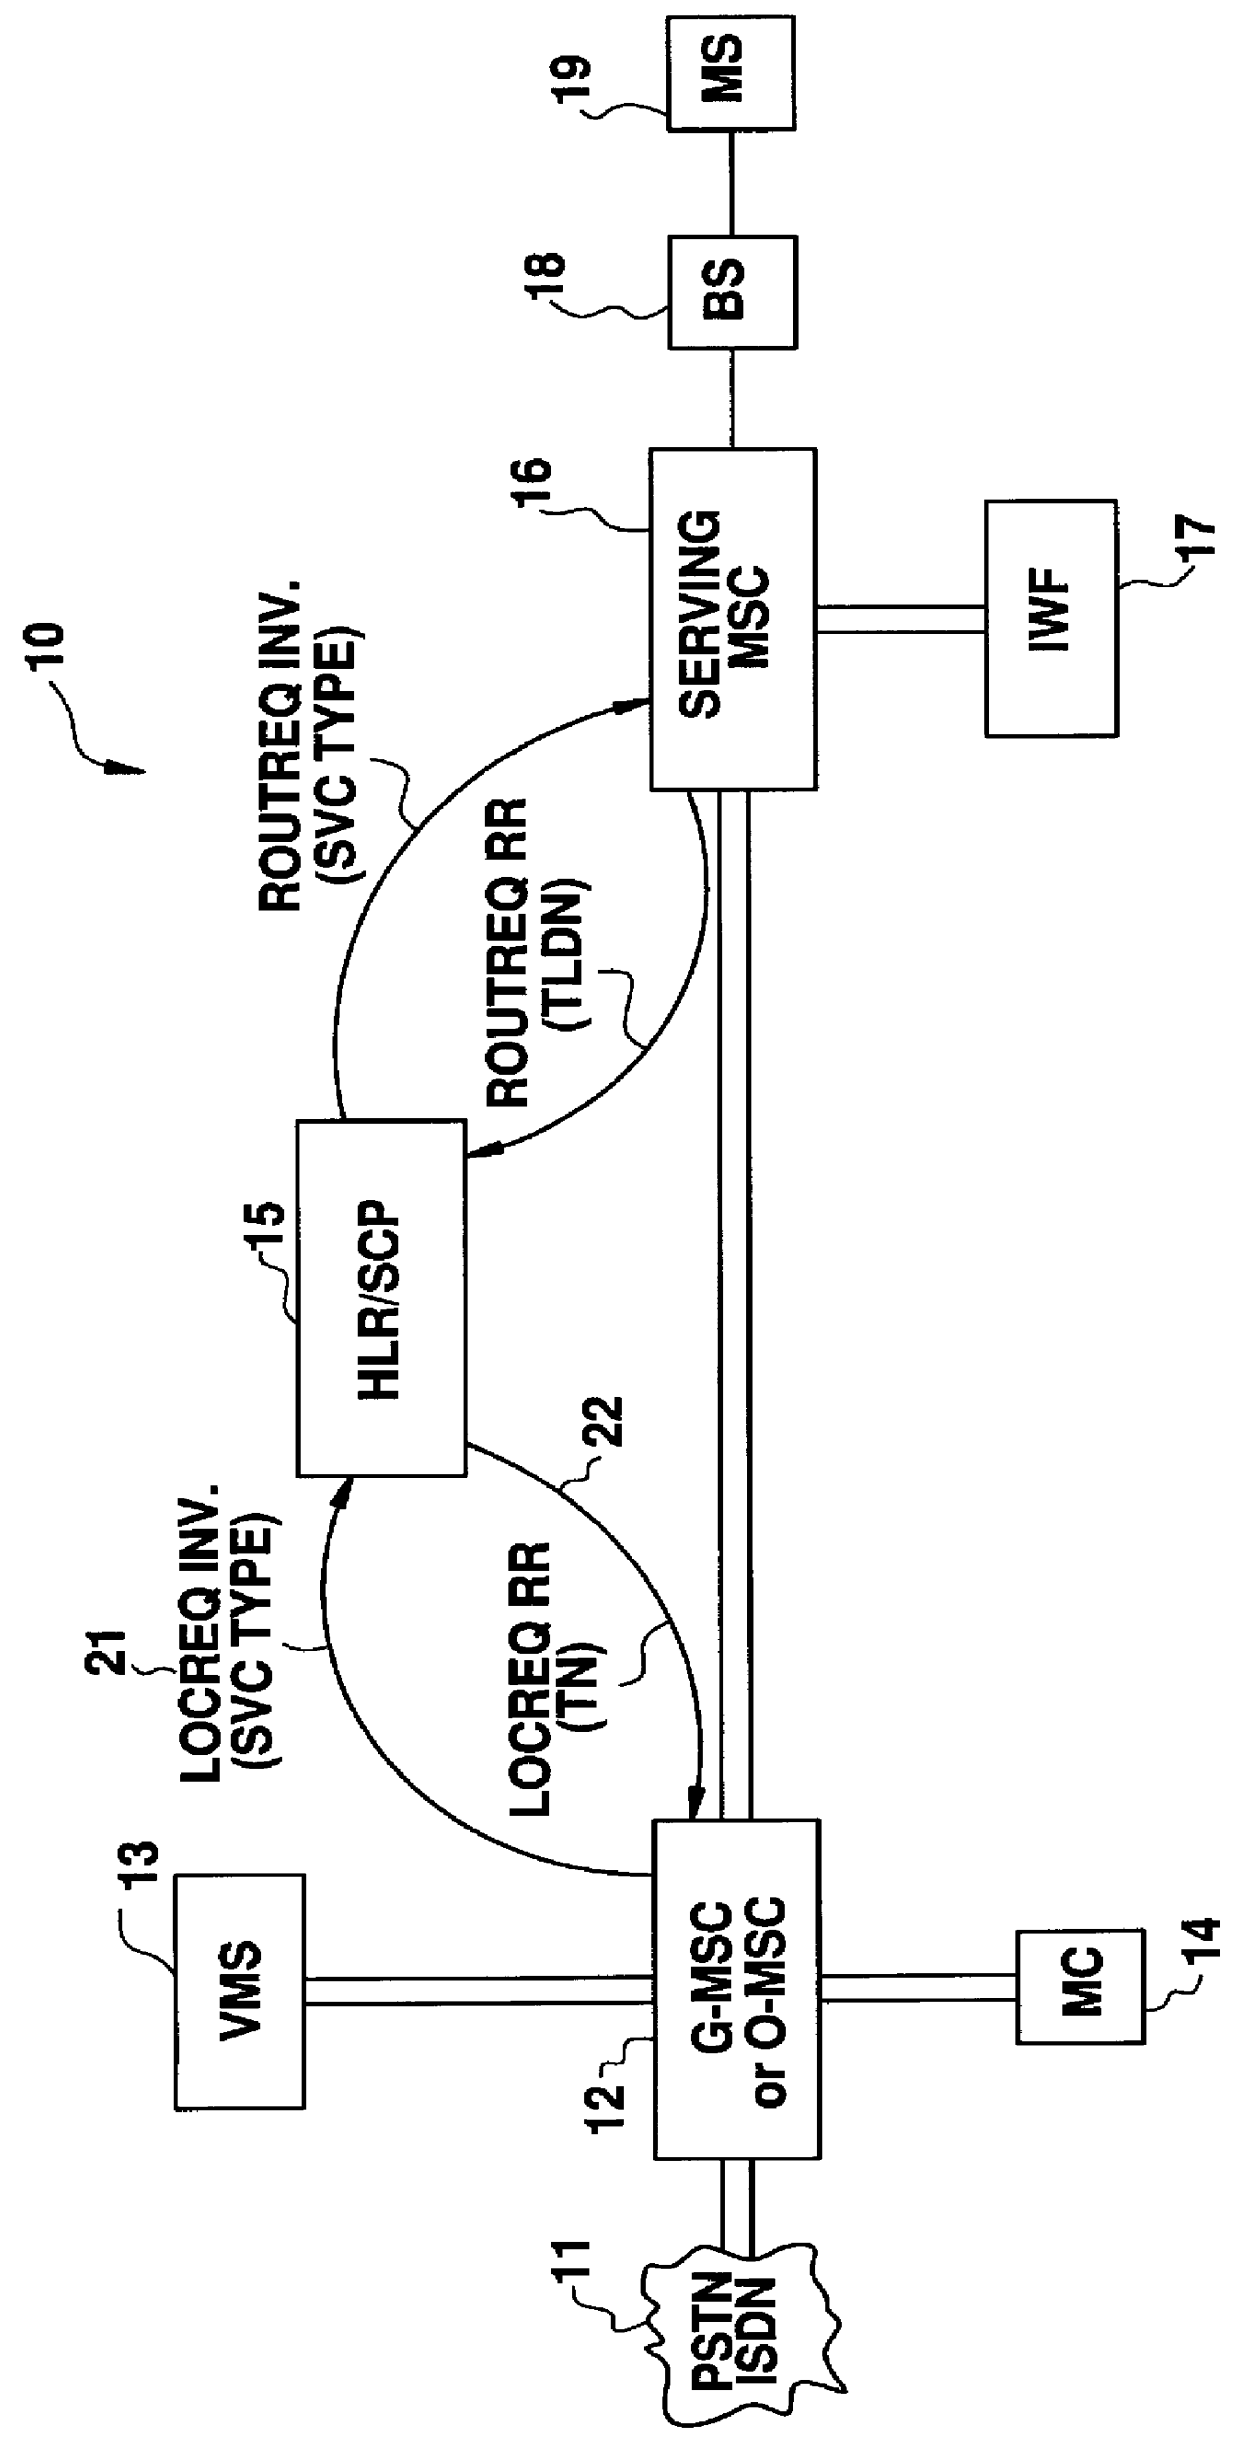 System and method of forwarding data calls in a radio telecommunications network